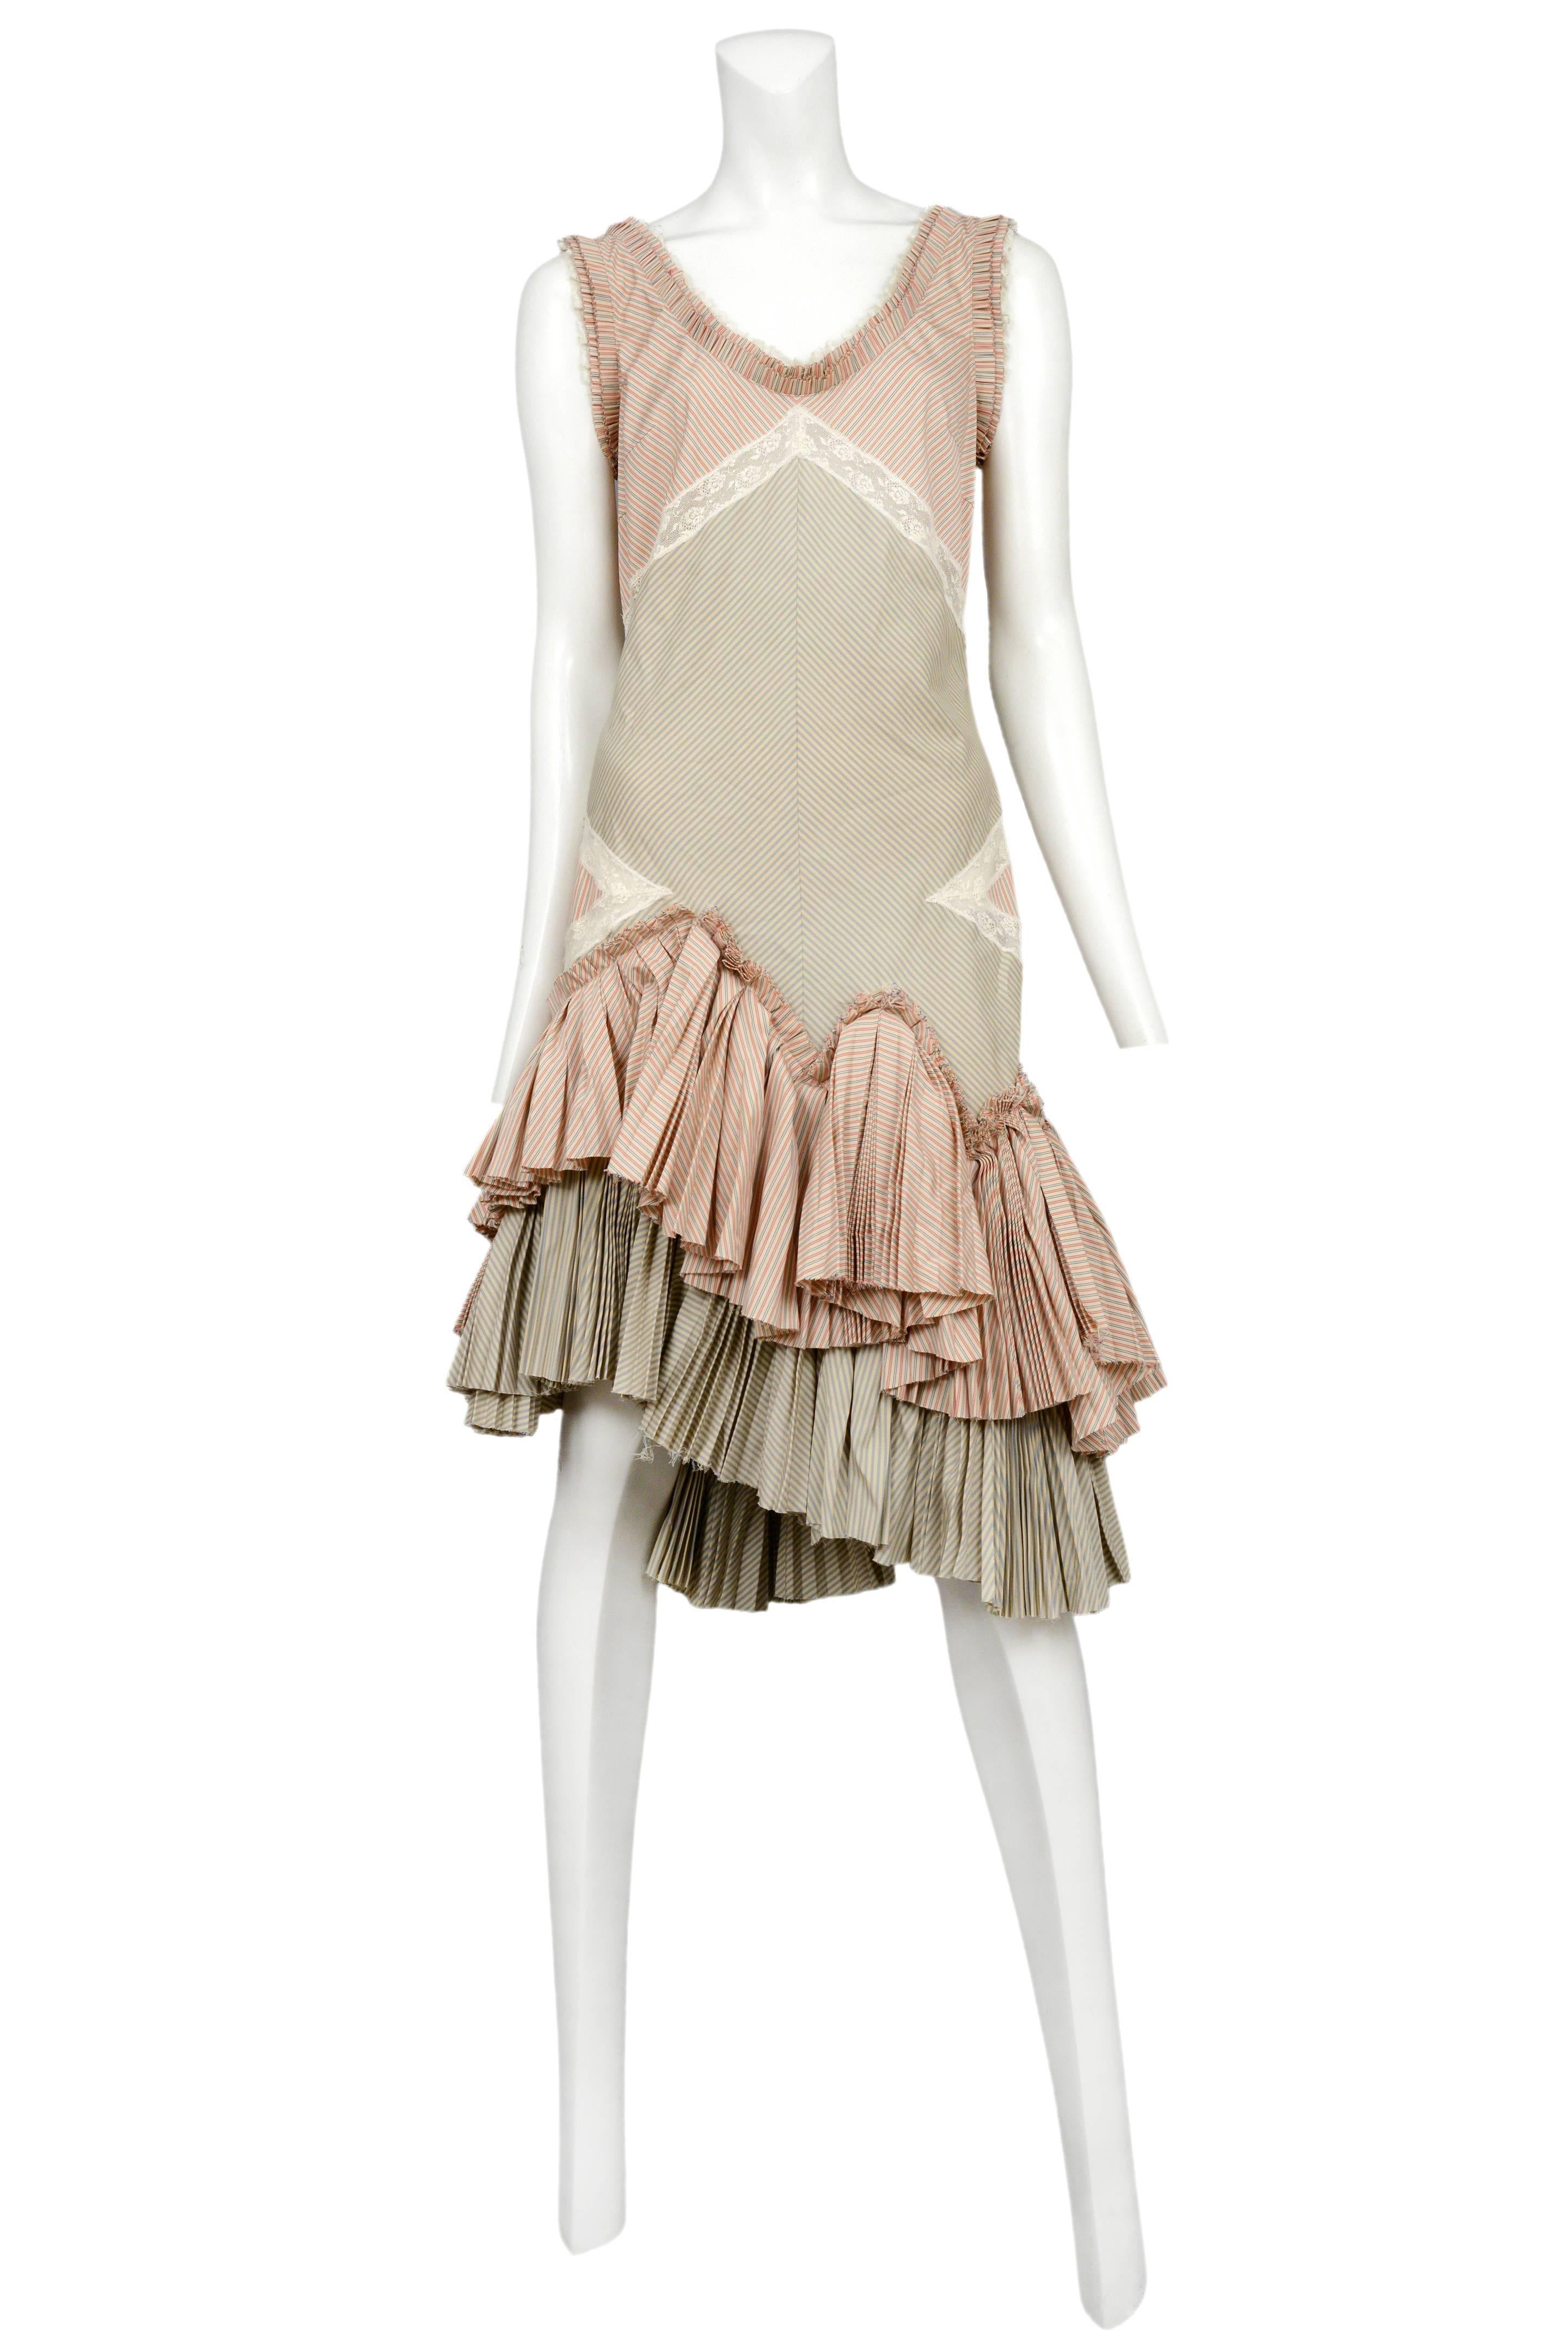 Vintage Alexander McQueen sleeveless pink stripe ruffle dress featuring two color ways of striped cotton interspersed with ivory lace trim and two tiers of pleated ruffles at the hem. Circa 2004.
Please inquire for additional images.